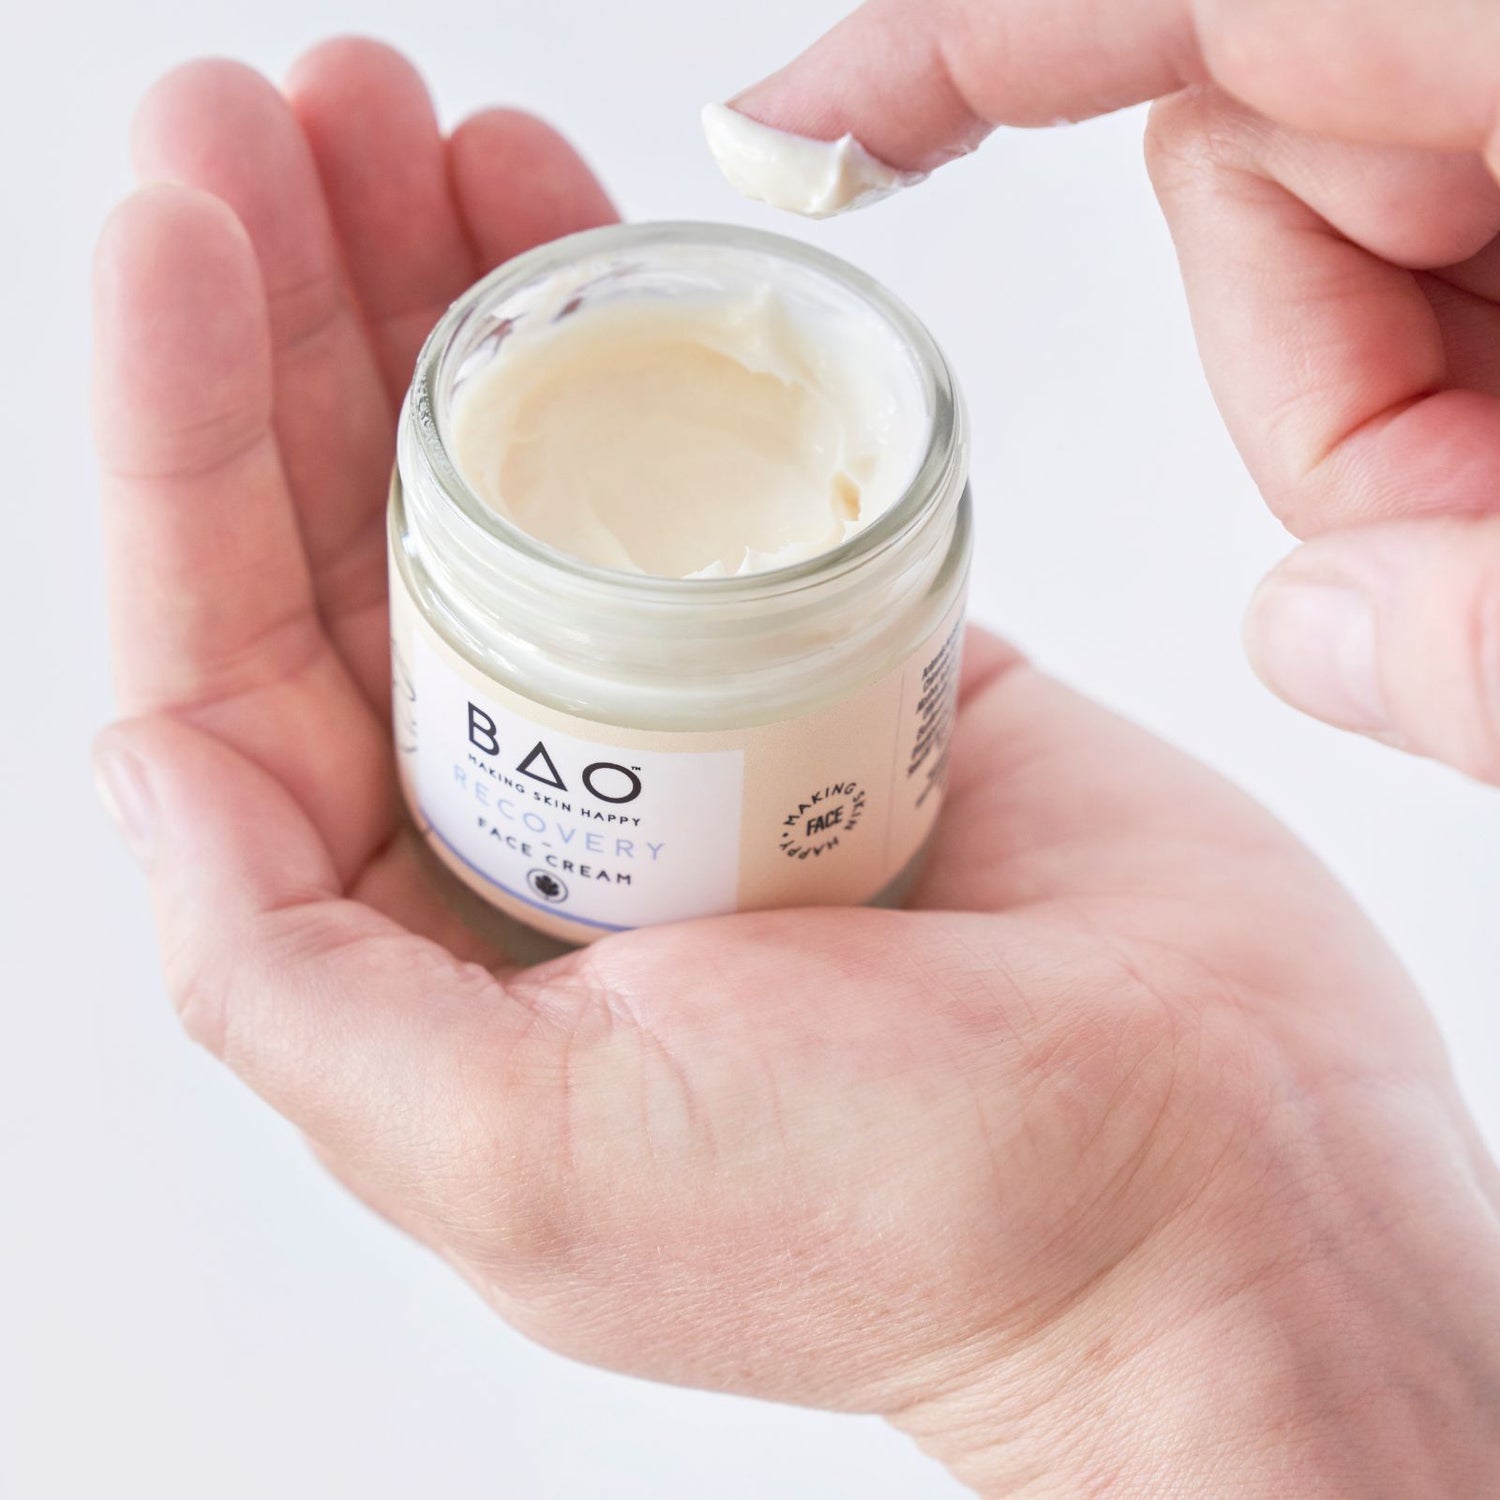 BAO best seller the Recovery Face Cream in a hand